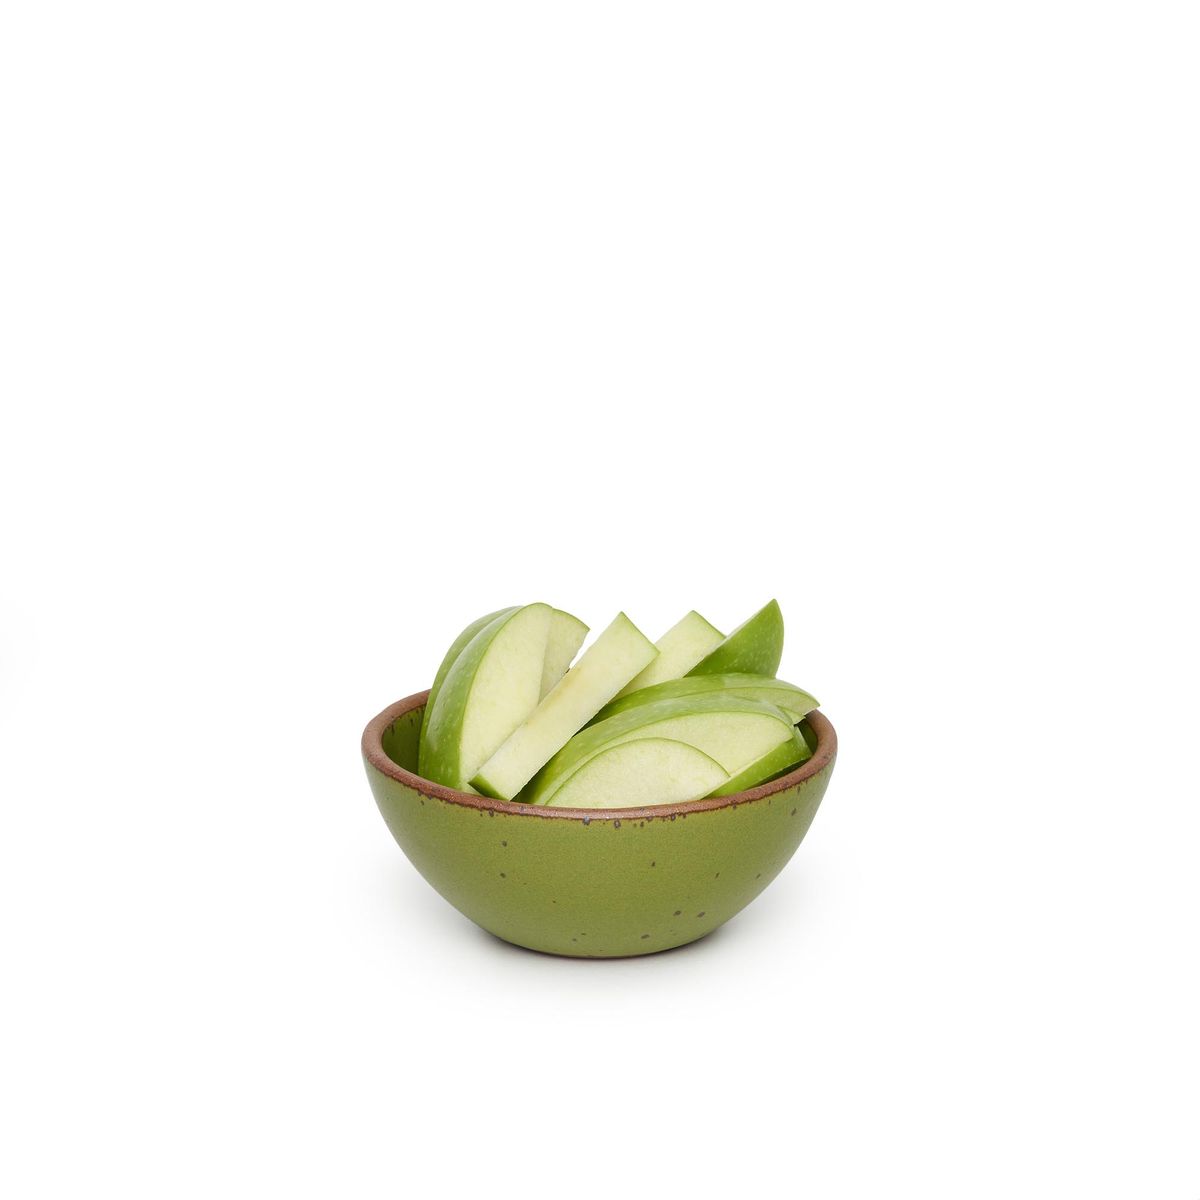 Ice Cream Bowl in Fiddlehead, a mossy, olive green. The bowl is perfect for two scoops of ice cream – but don't stop there. Here, it's pictured with granny smith apple slides. The perfect bowl for a snack.